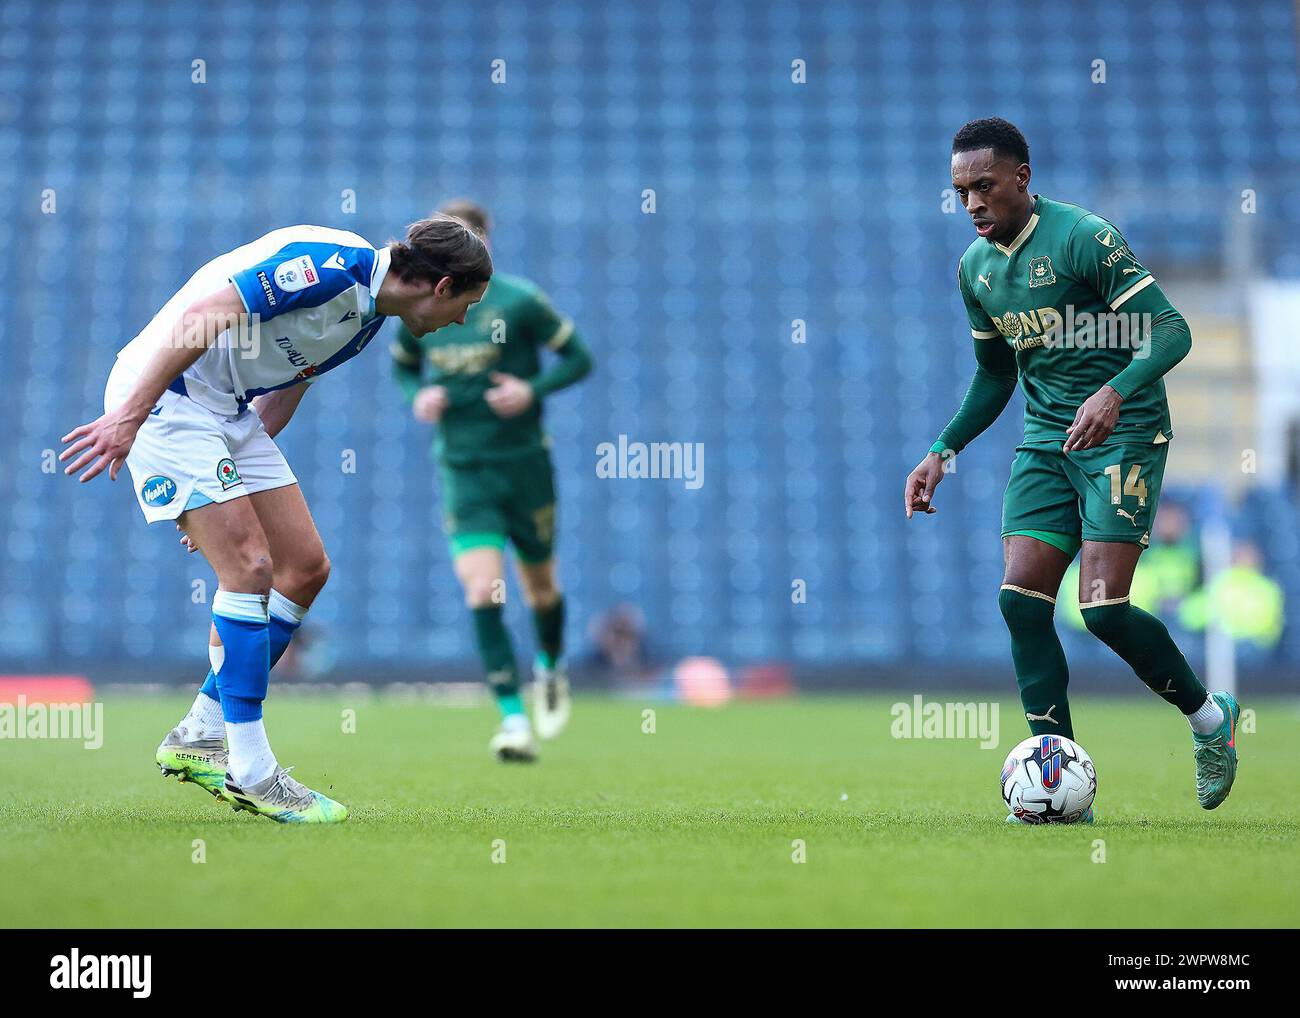 Mickel Miller of Plymouth Argyle attacking during the Sky Bet Championship match Blackburn Rovers vs Plymouth Argyle at Ewood Park, Blackburn, United Kingdom, 9th March 2024 (Photo by Stan Kasala/News Images) in, on 3/9/2024. (Photo by Stan Kasala/News Images/Sipa USA) Credit: Sipa USA/Alamy Live News Stock Photo